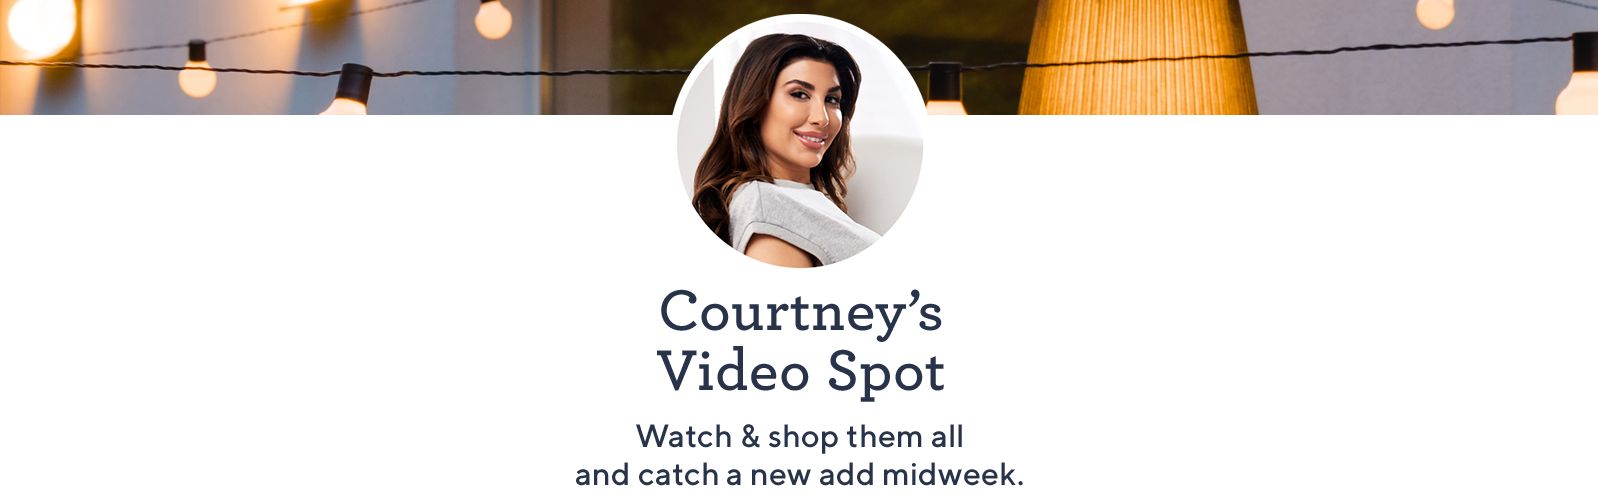 Courtney's Video Spot. Watch & shop them all and catch a new add midweek.